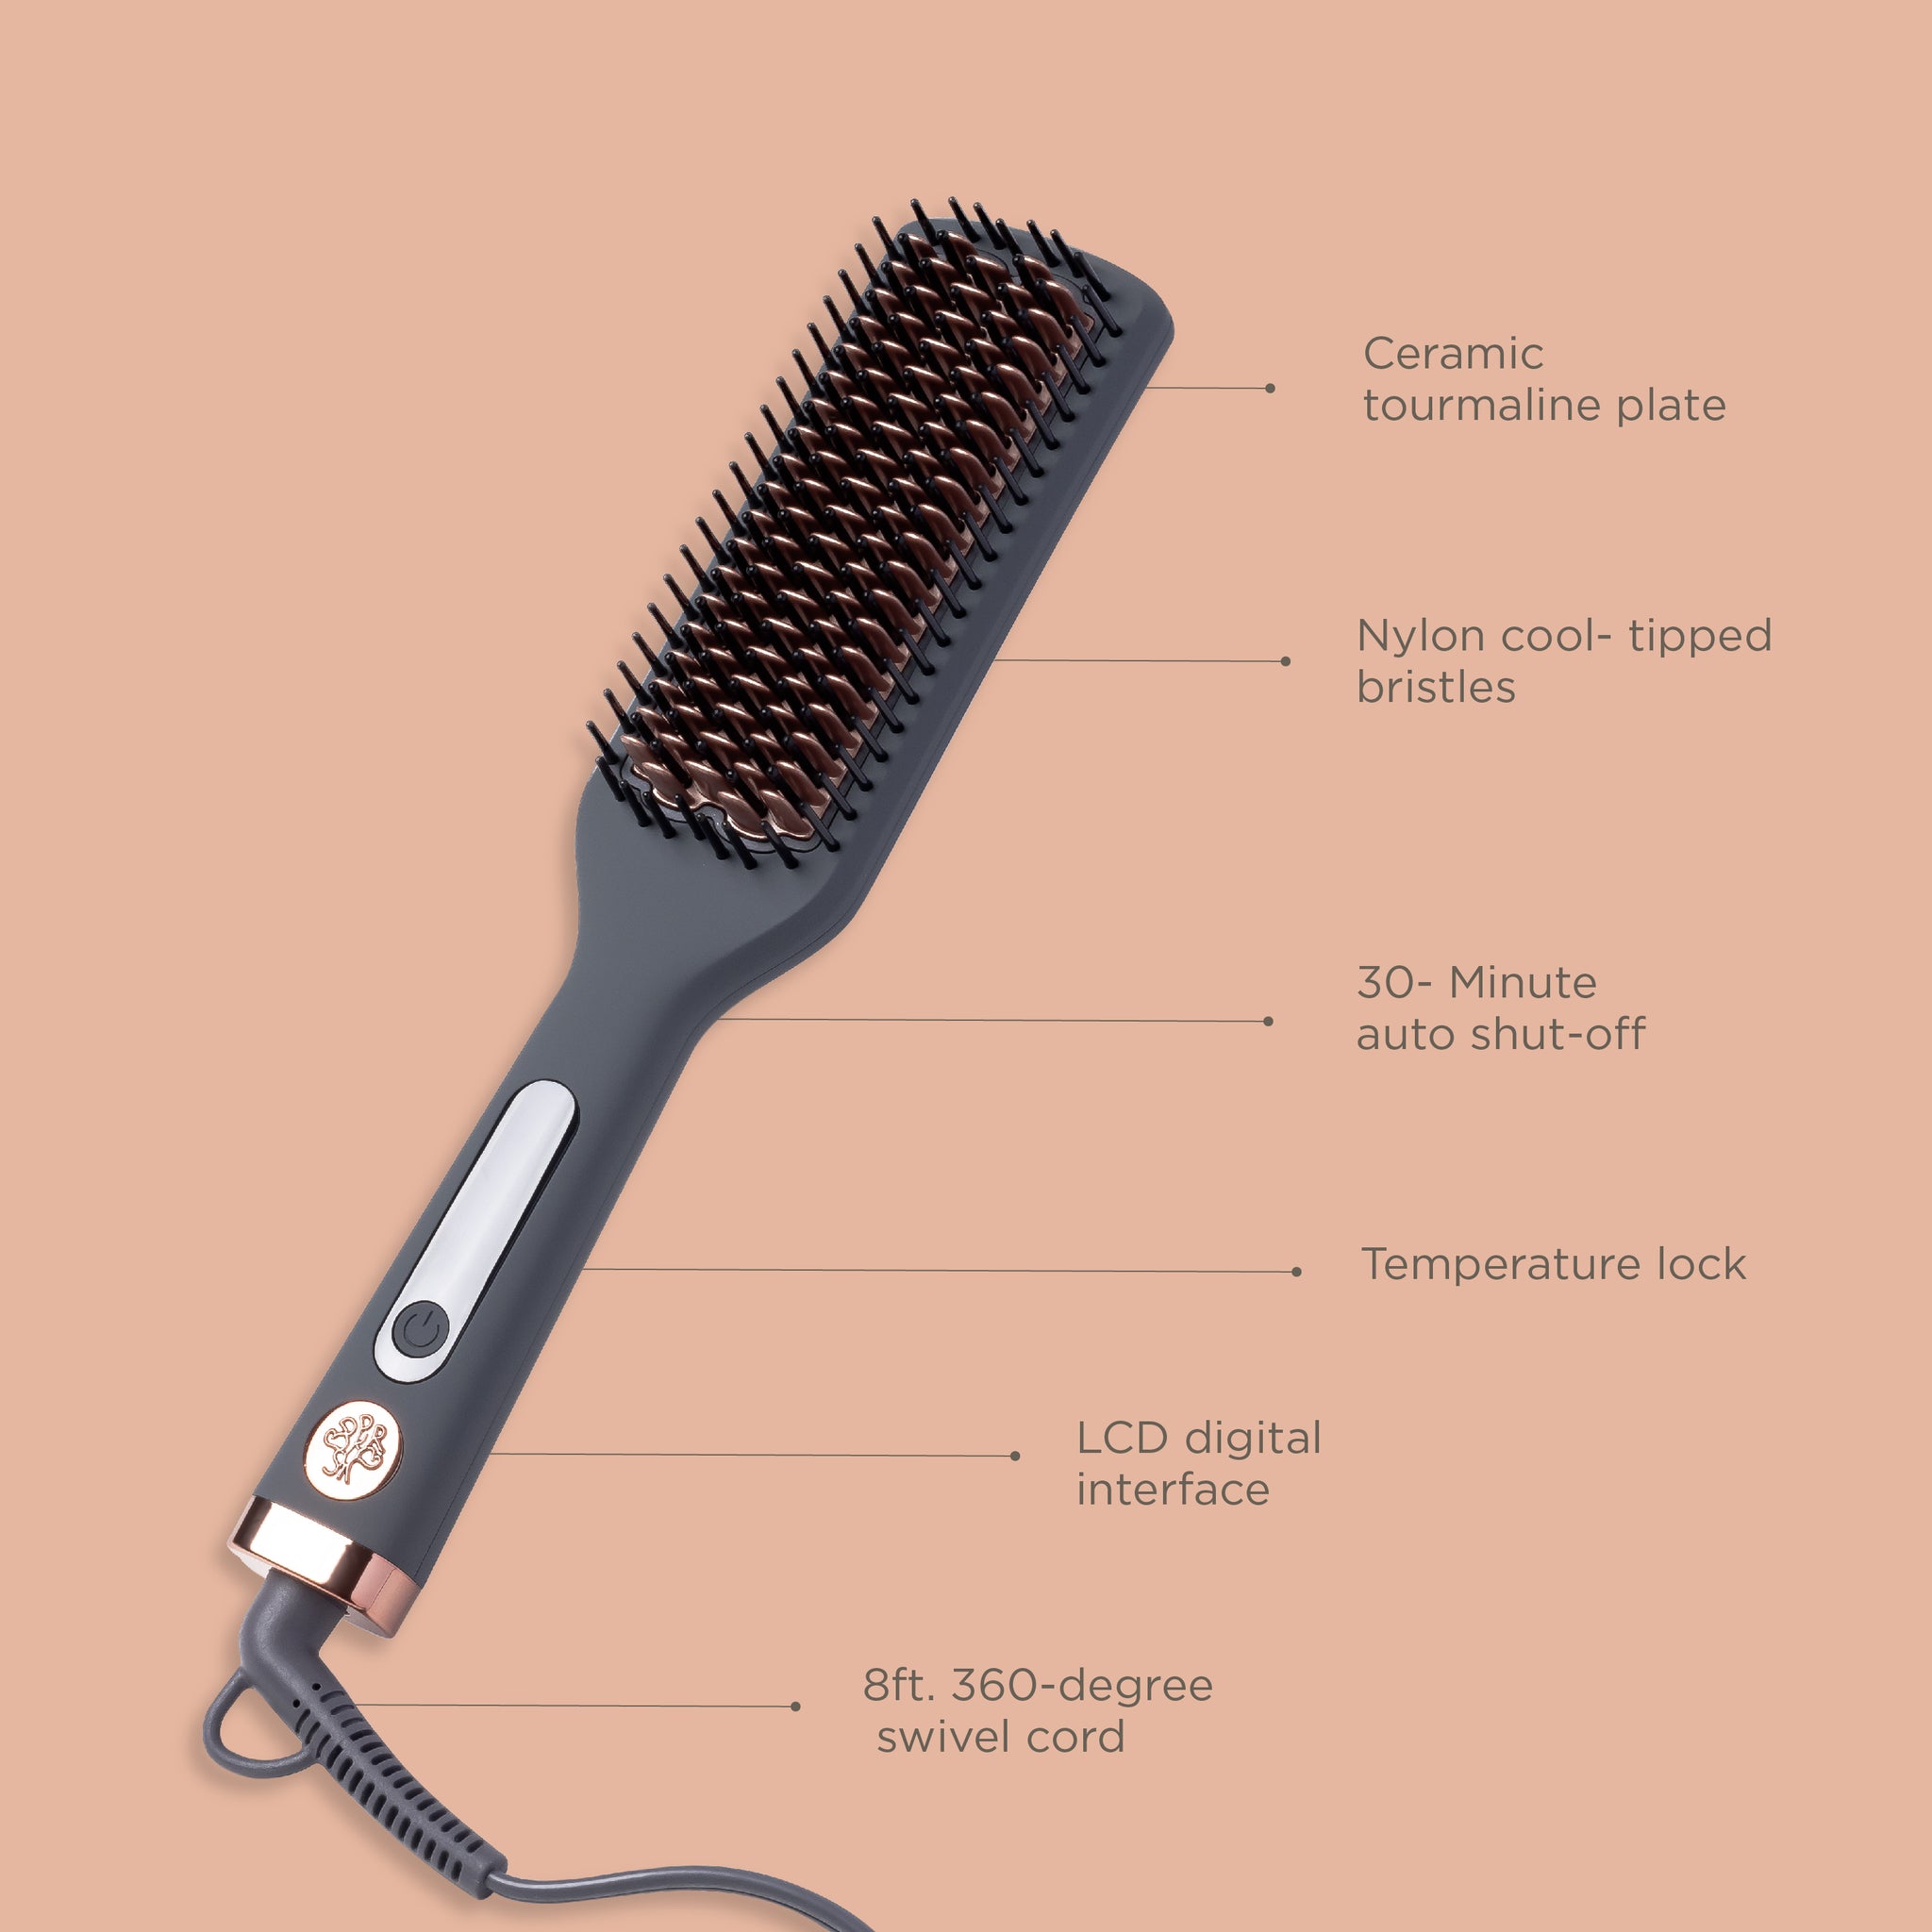 DAFNI Go | Heated hair brush review - Opposable Thumbs